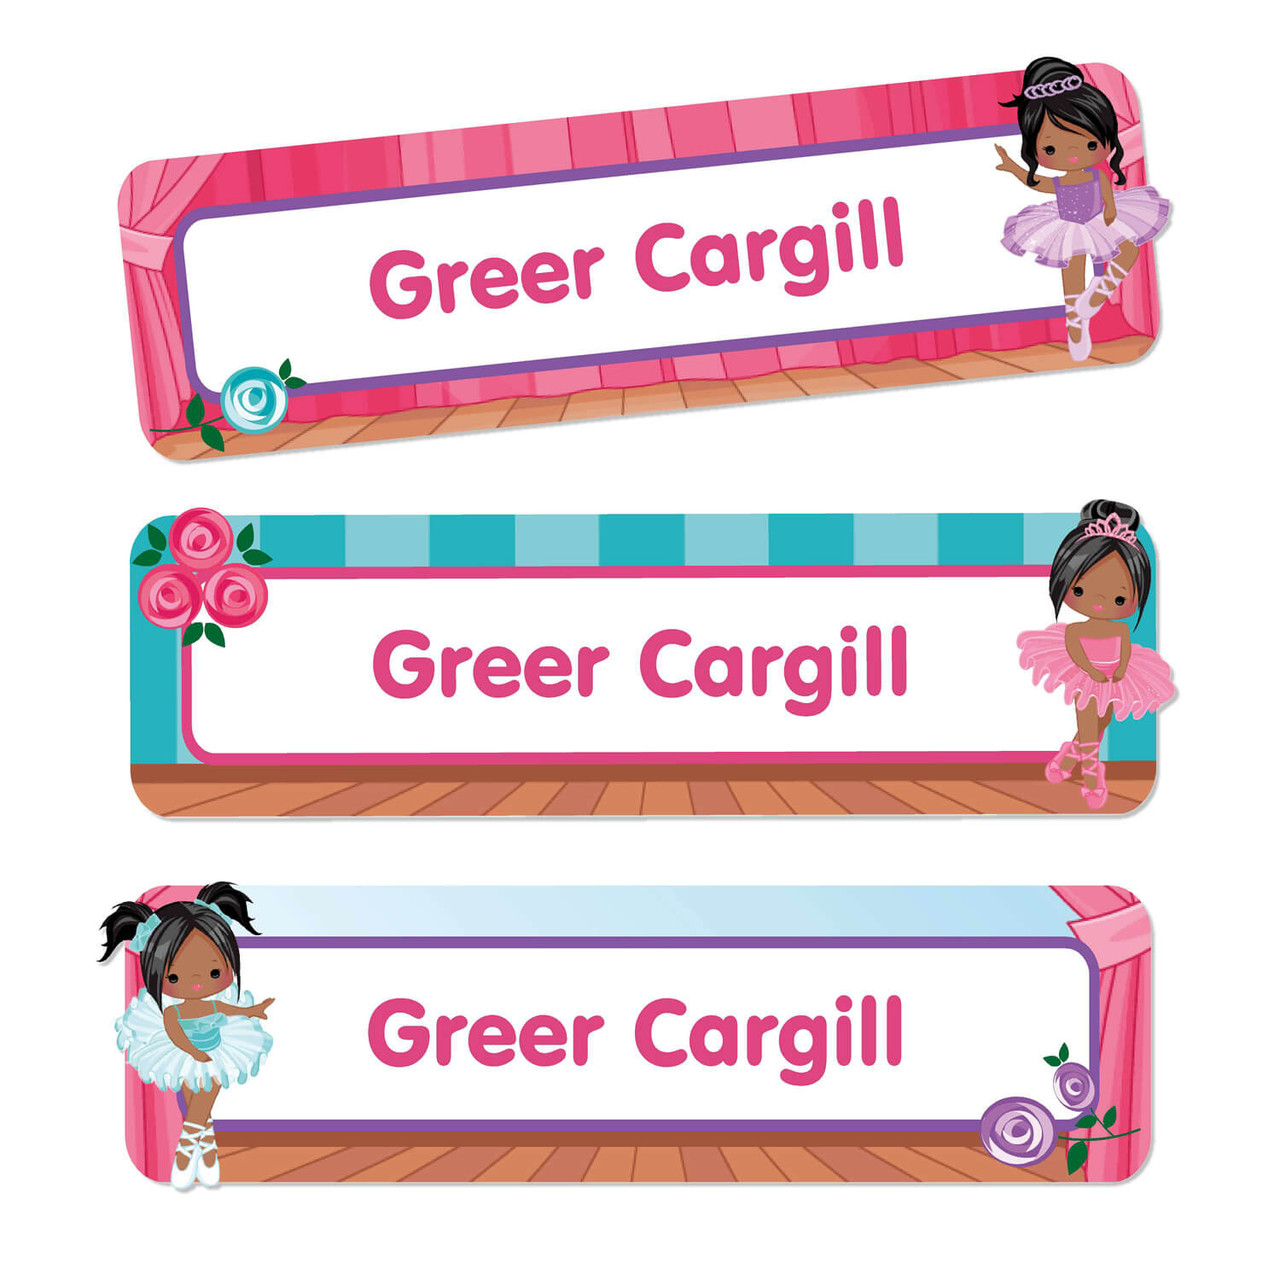 Large Name Labels for Kids, Large Name Stickers